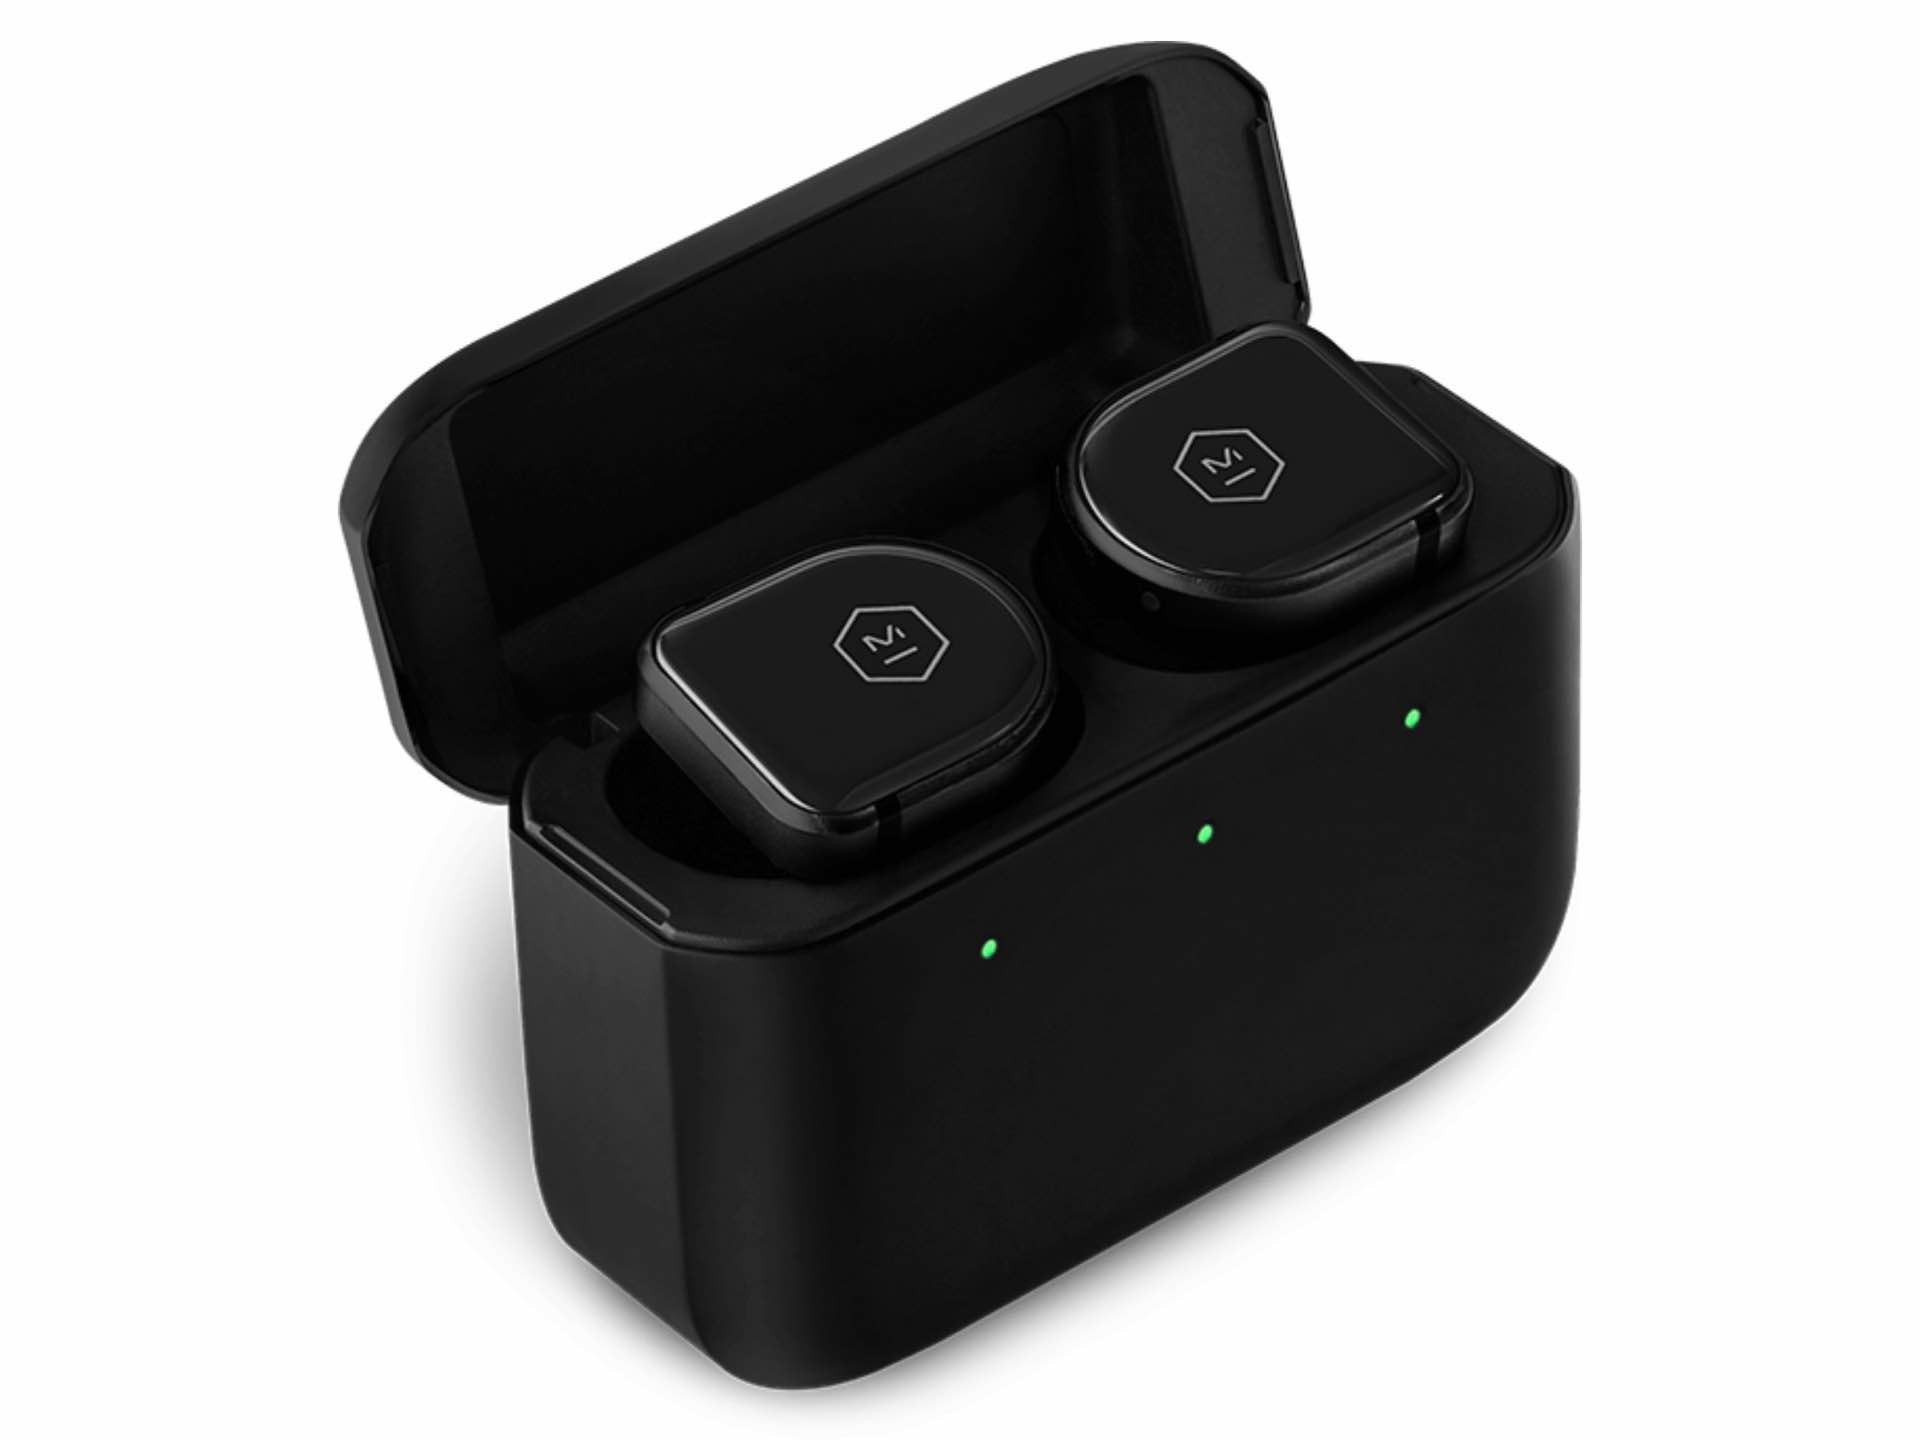 Master & Dynamic MW08 true wireless earphones with active noise cancellation. ($299)